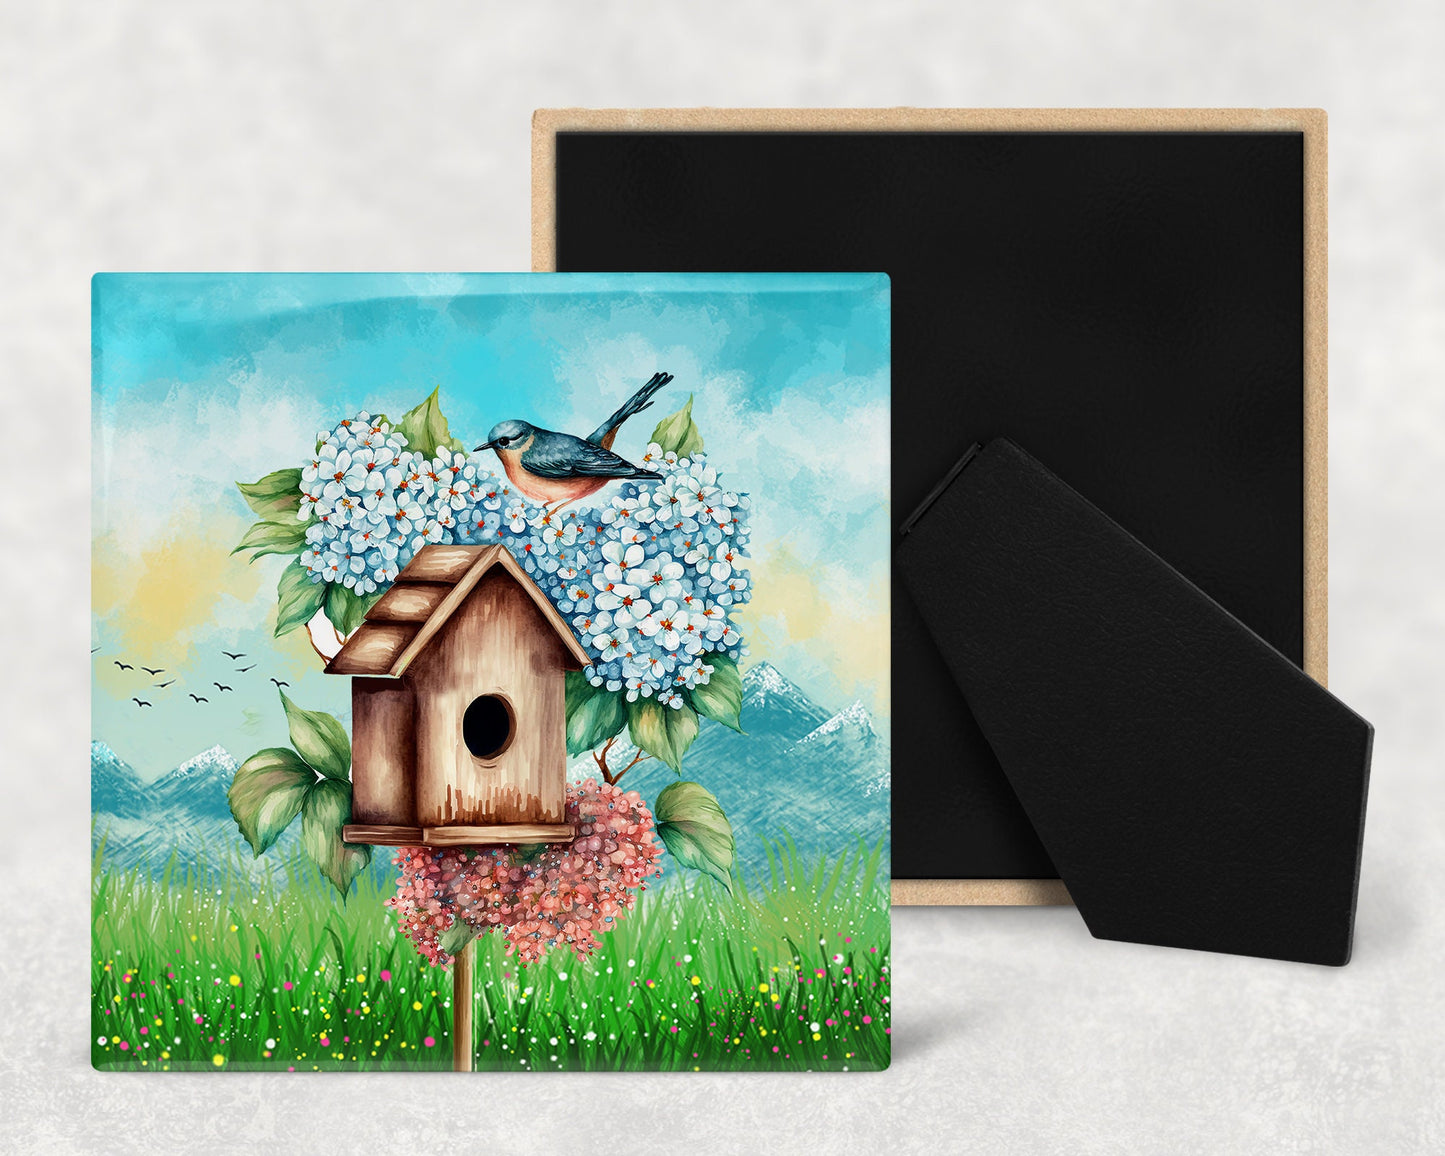 Birdhouses and Flowers Art Decorative Ceramic Tile Set with Optional Easel Back - Available in 4 sizes - Set of 4